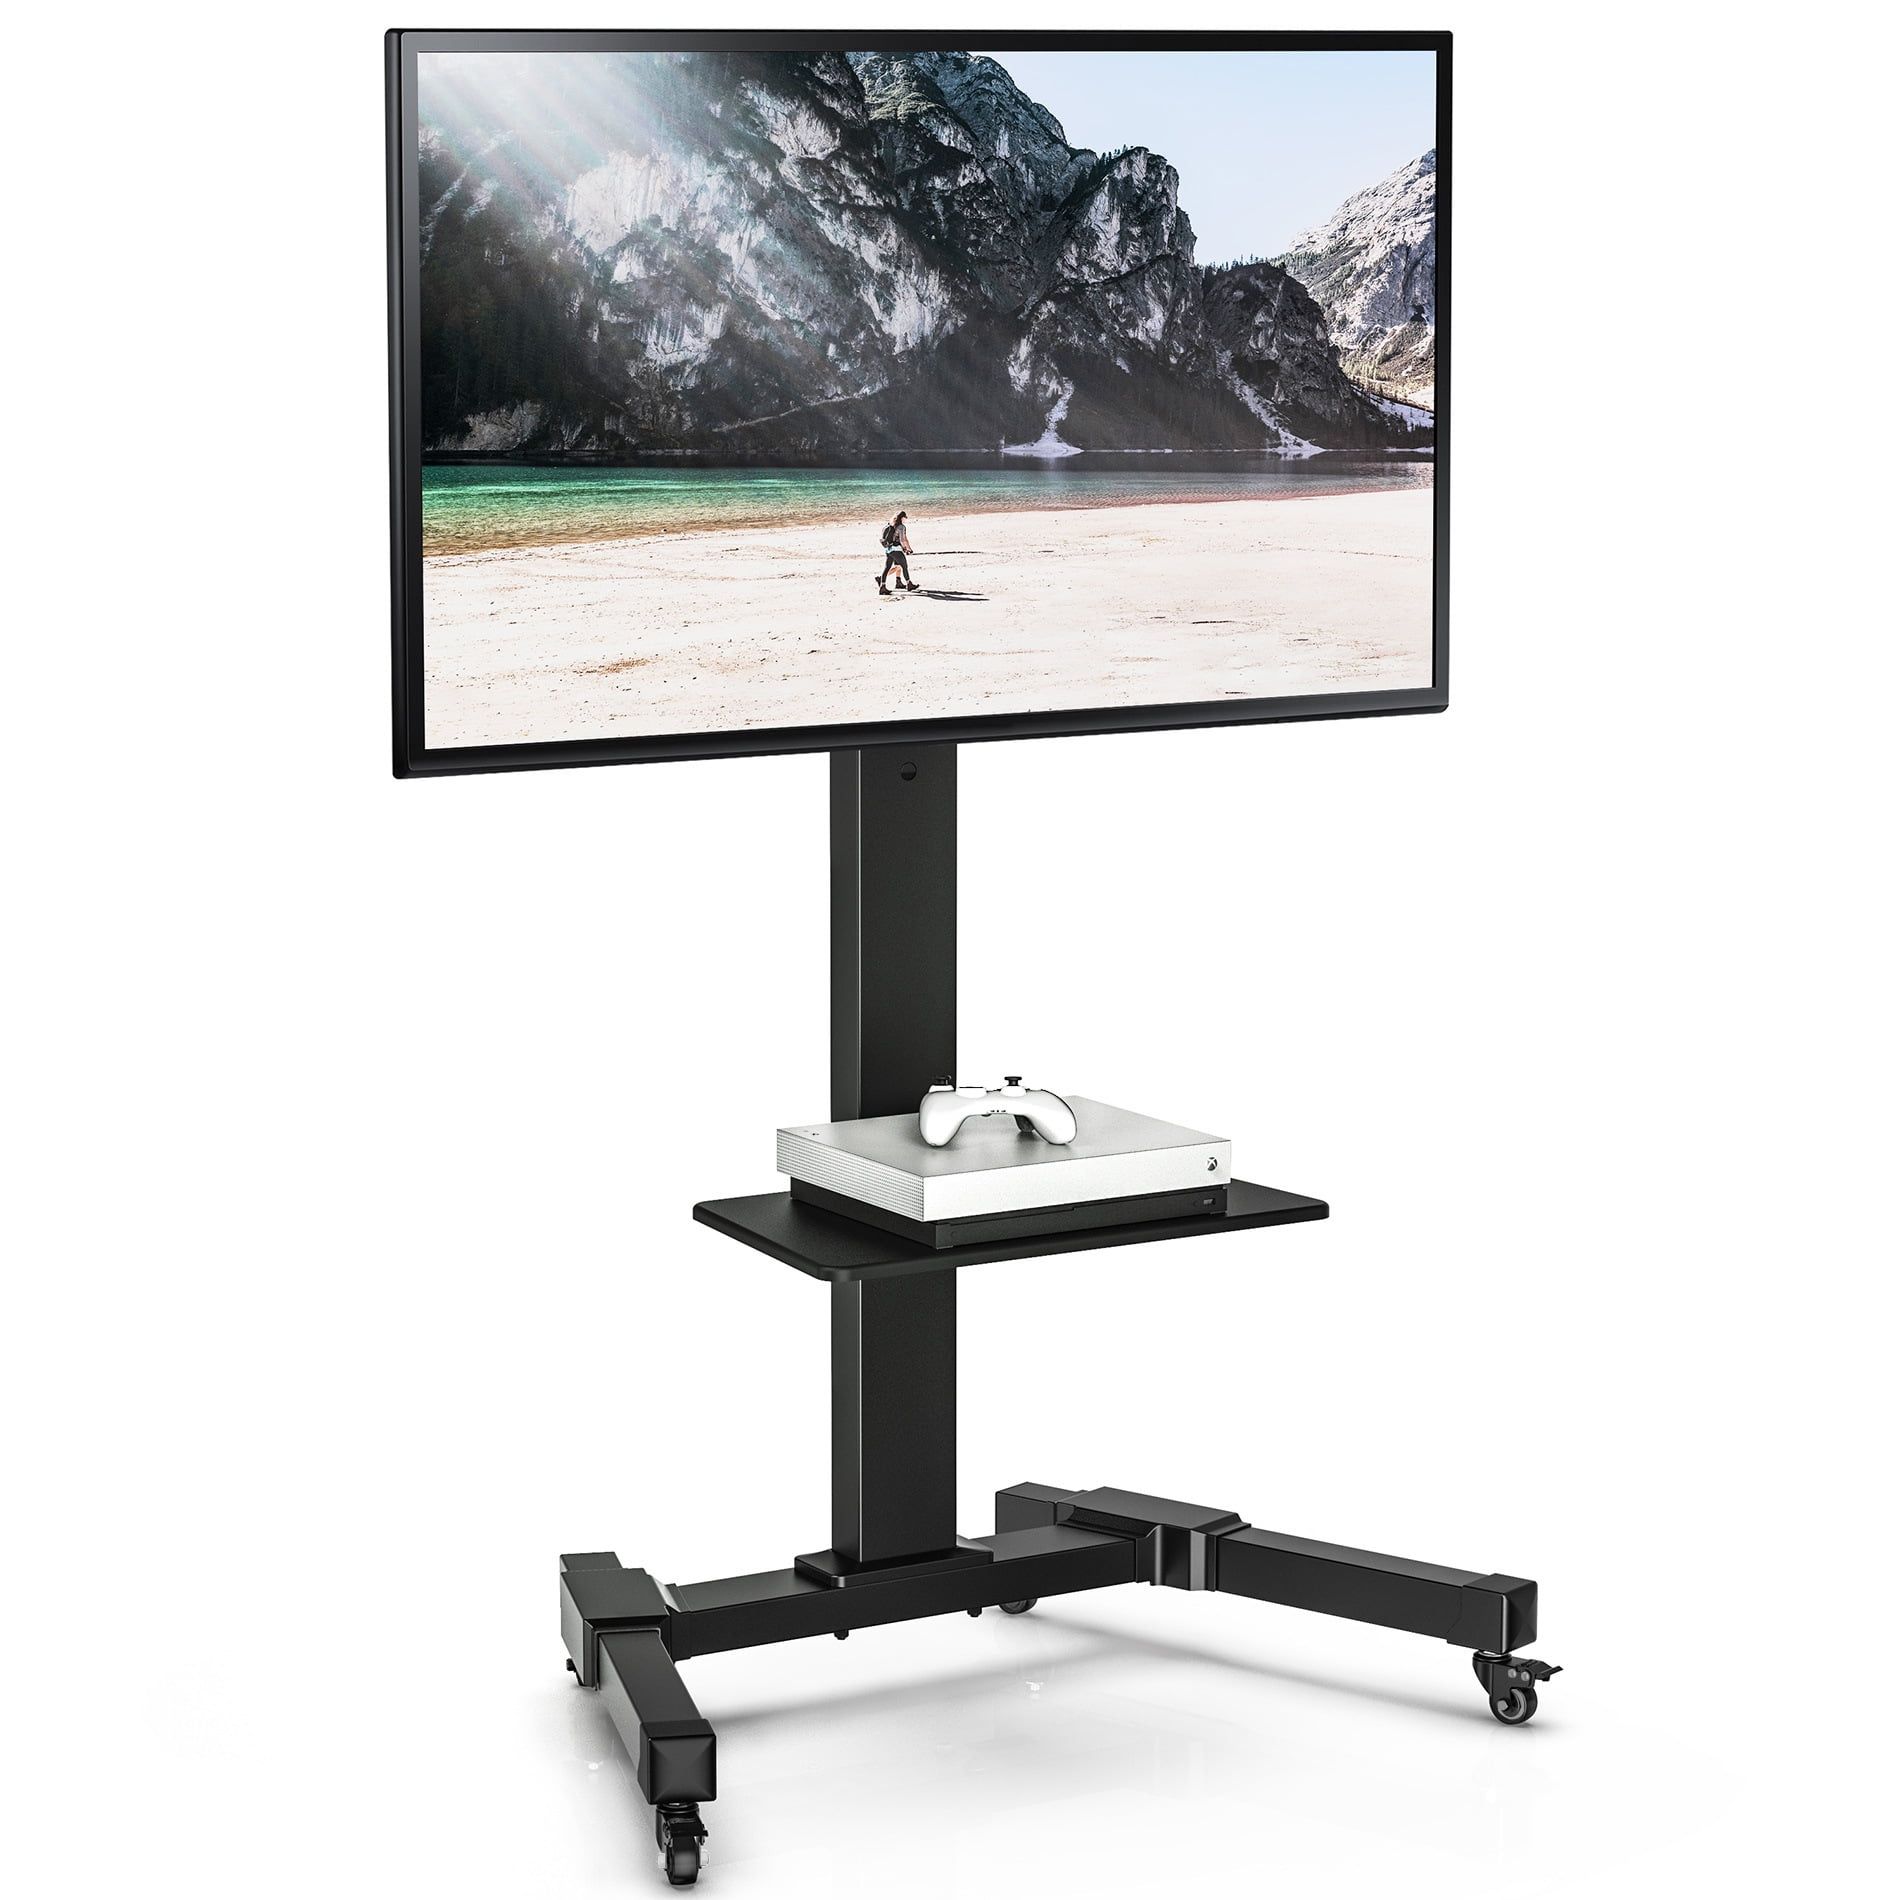 Fitueyes Mobile Swivel Tv Stand Trolley Height Adjustable For 32 To 70 Regarding Foldable Portable Adjustable Tv Stands (View 5 of 20)